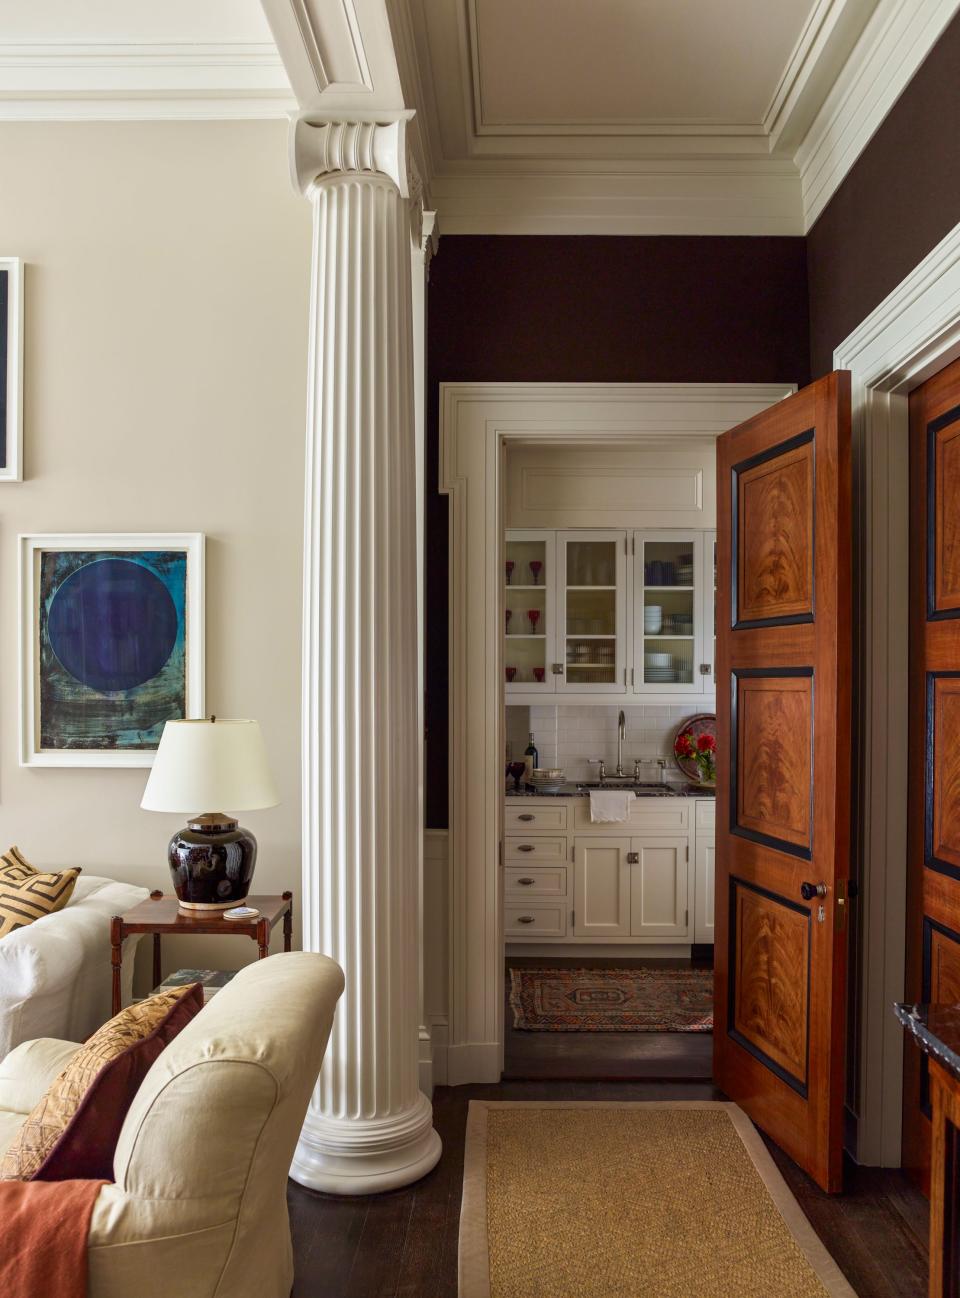 New York artist Jean Carrau created the faux wood–grained mahogany doors throughout the apartment; the hardware is from E.R. Butler & Co. Walls are upholstered in brown felt fabric from Rogers & Goffigon.